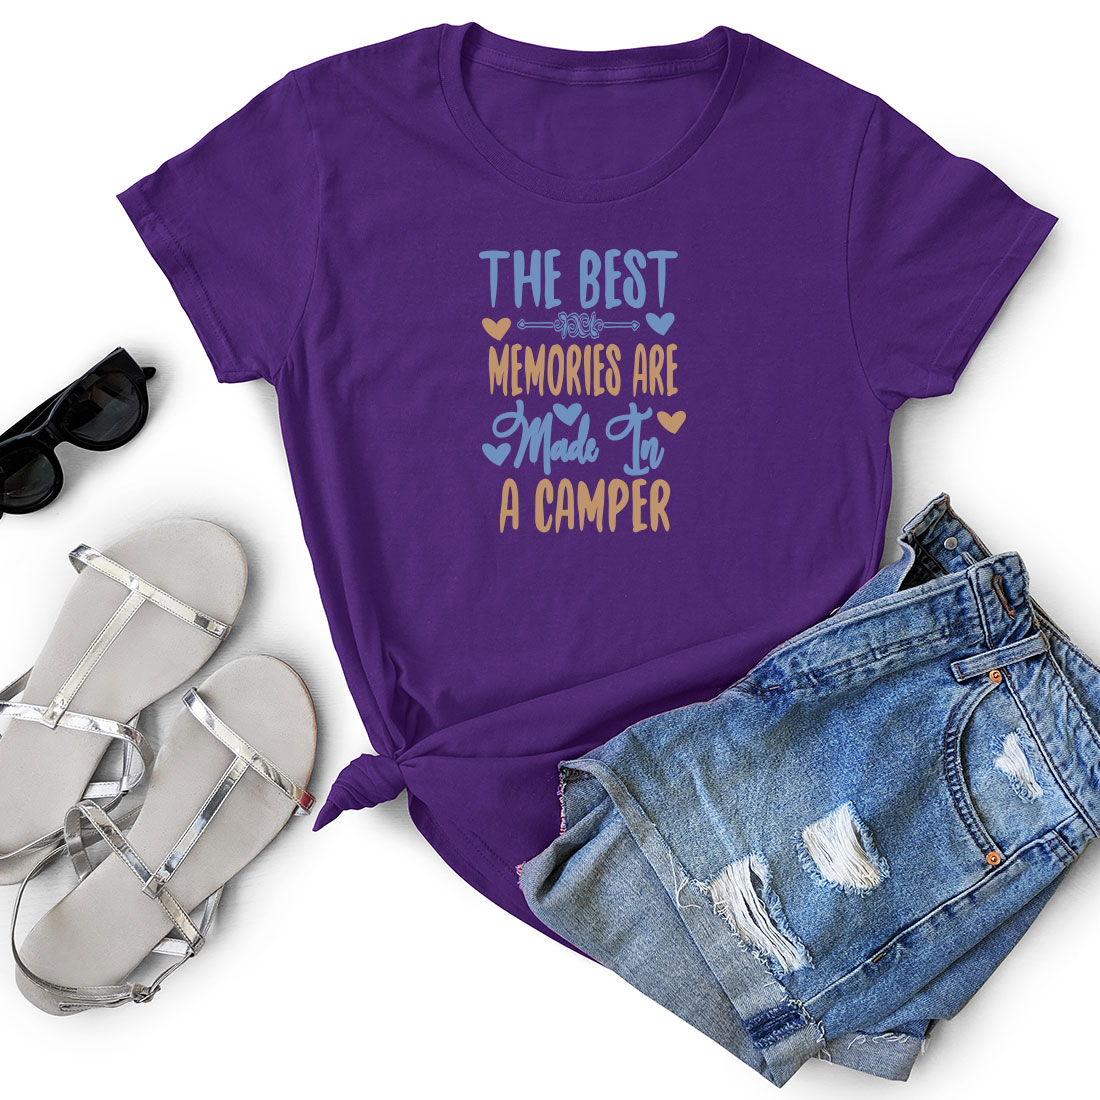 T - shirt that says the best memories are made a camper.